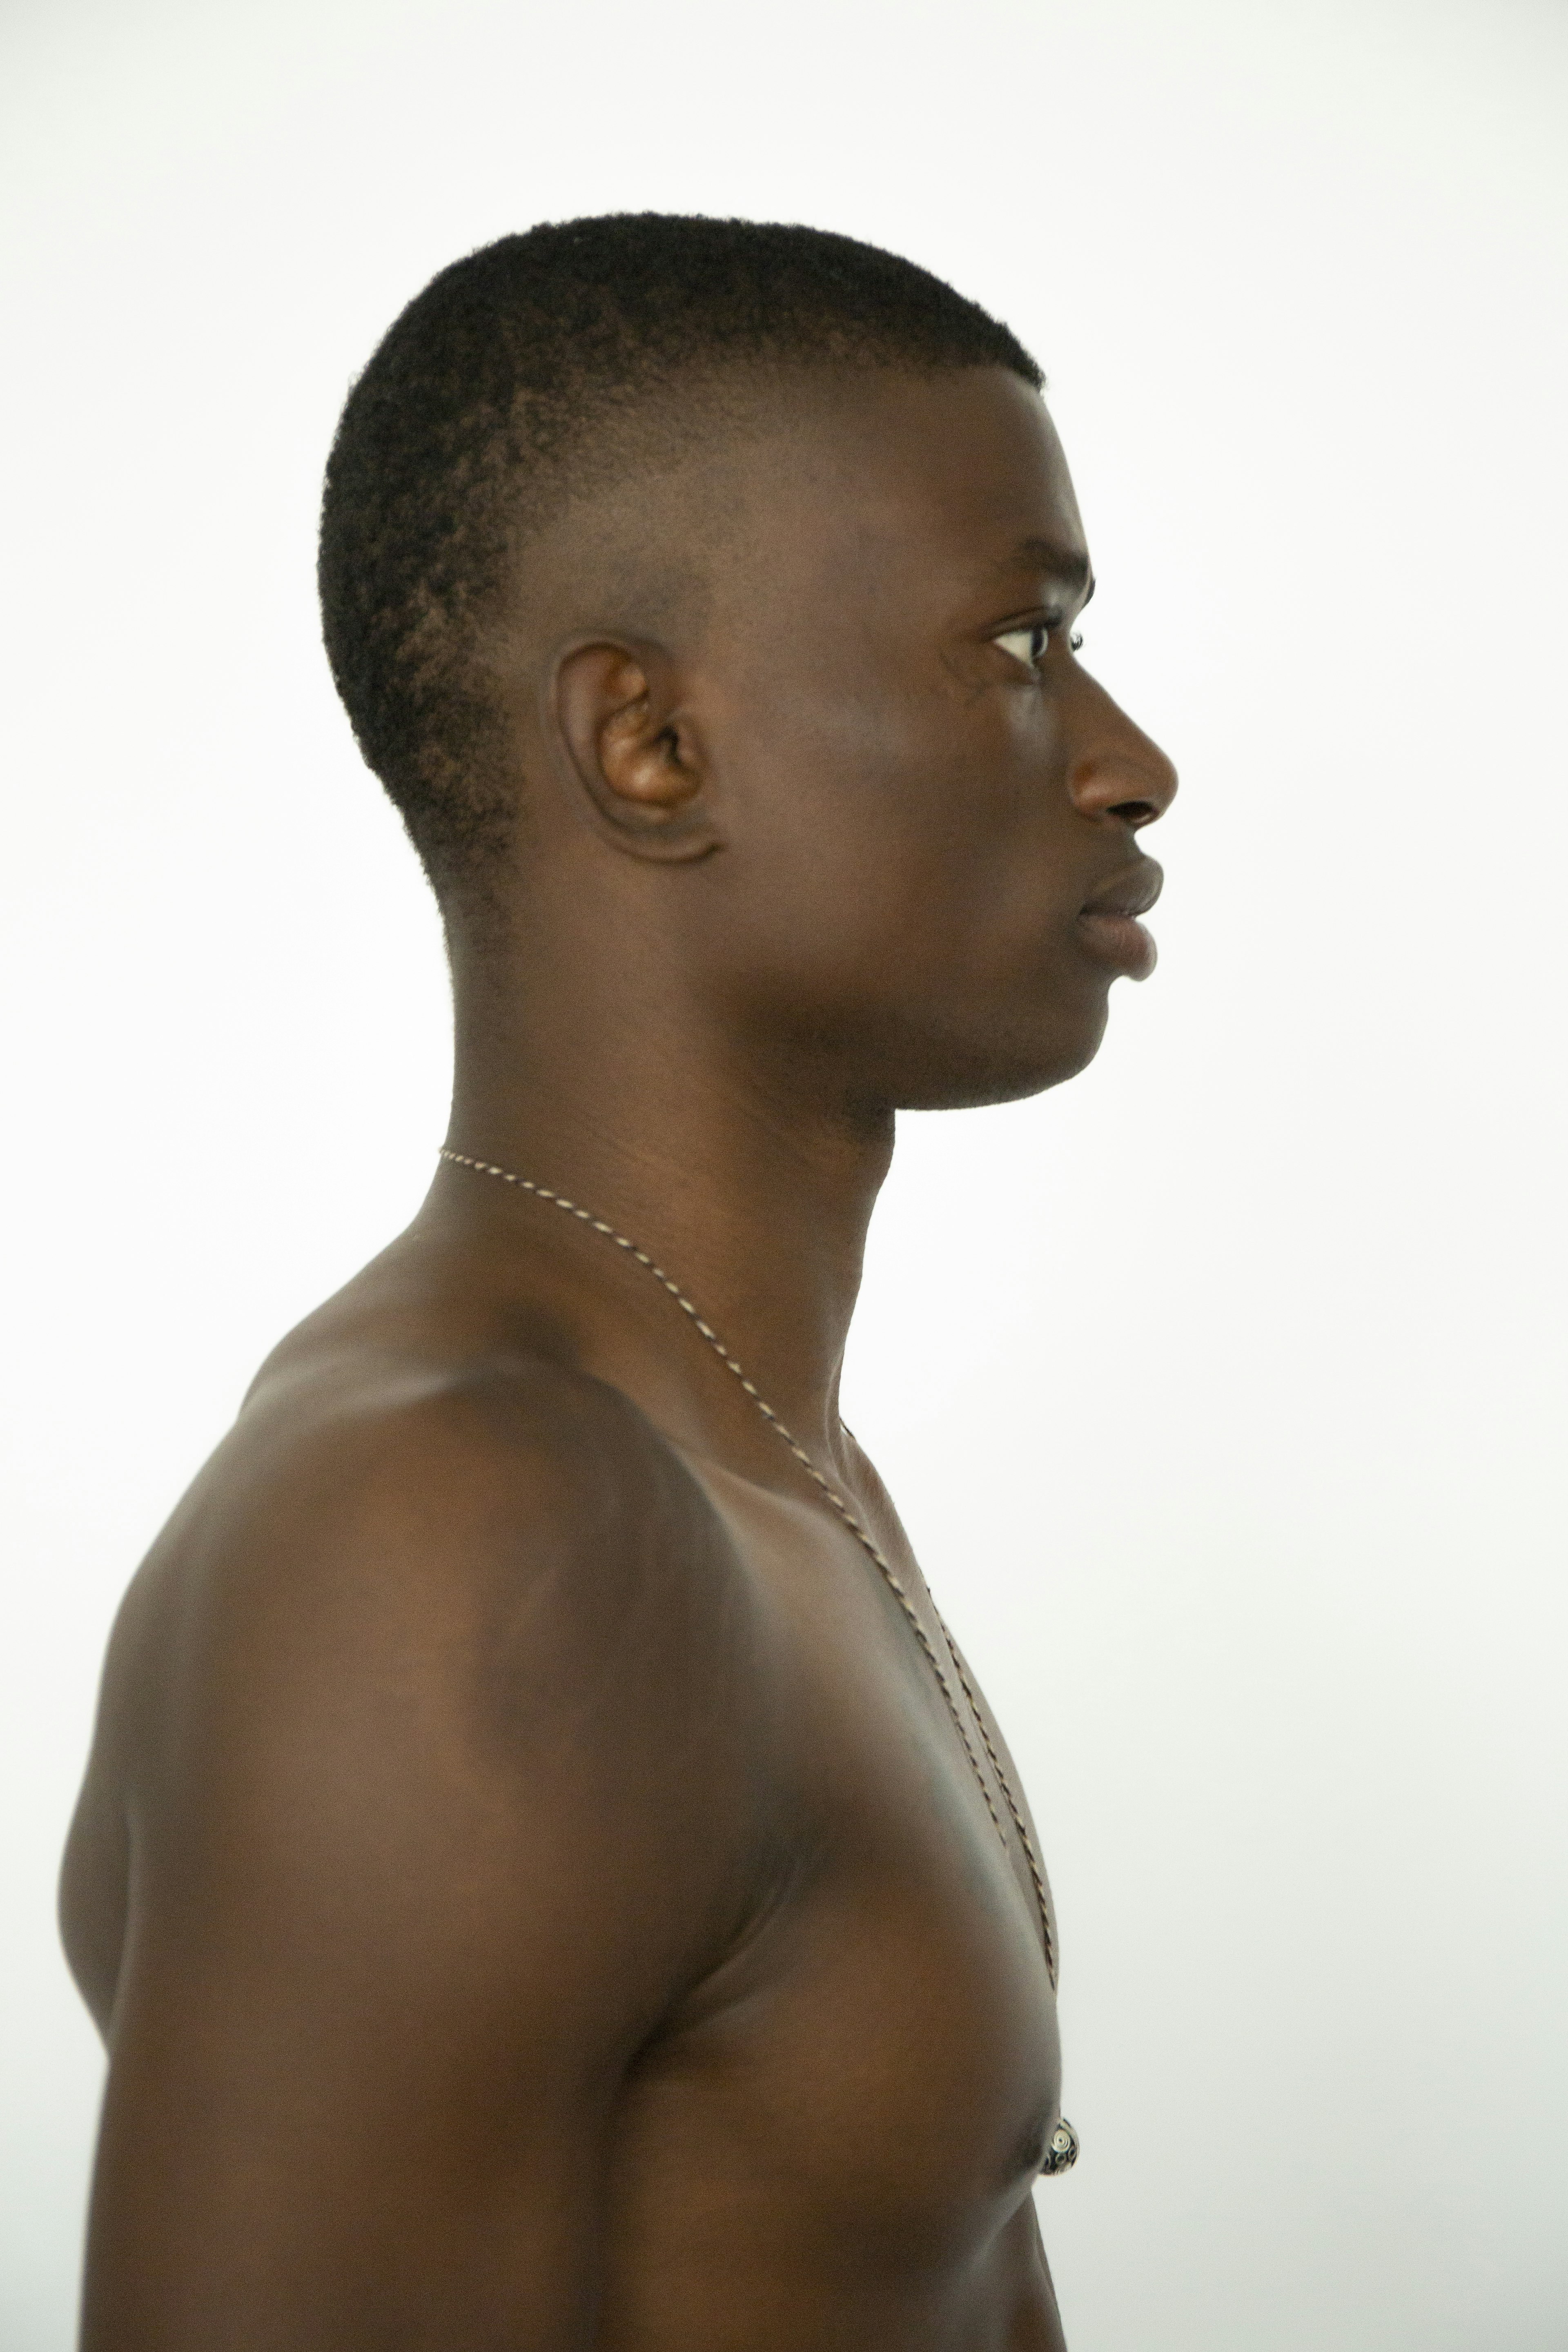 An image of Damie Gbolade